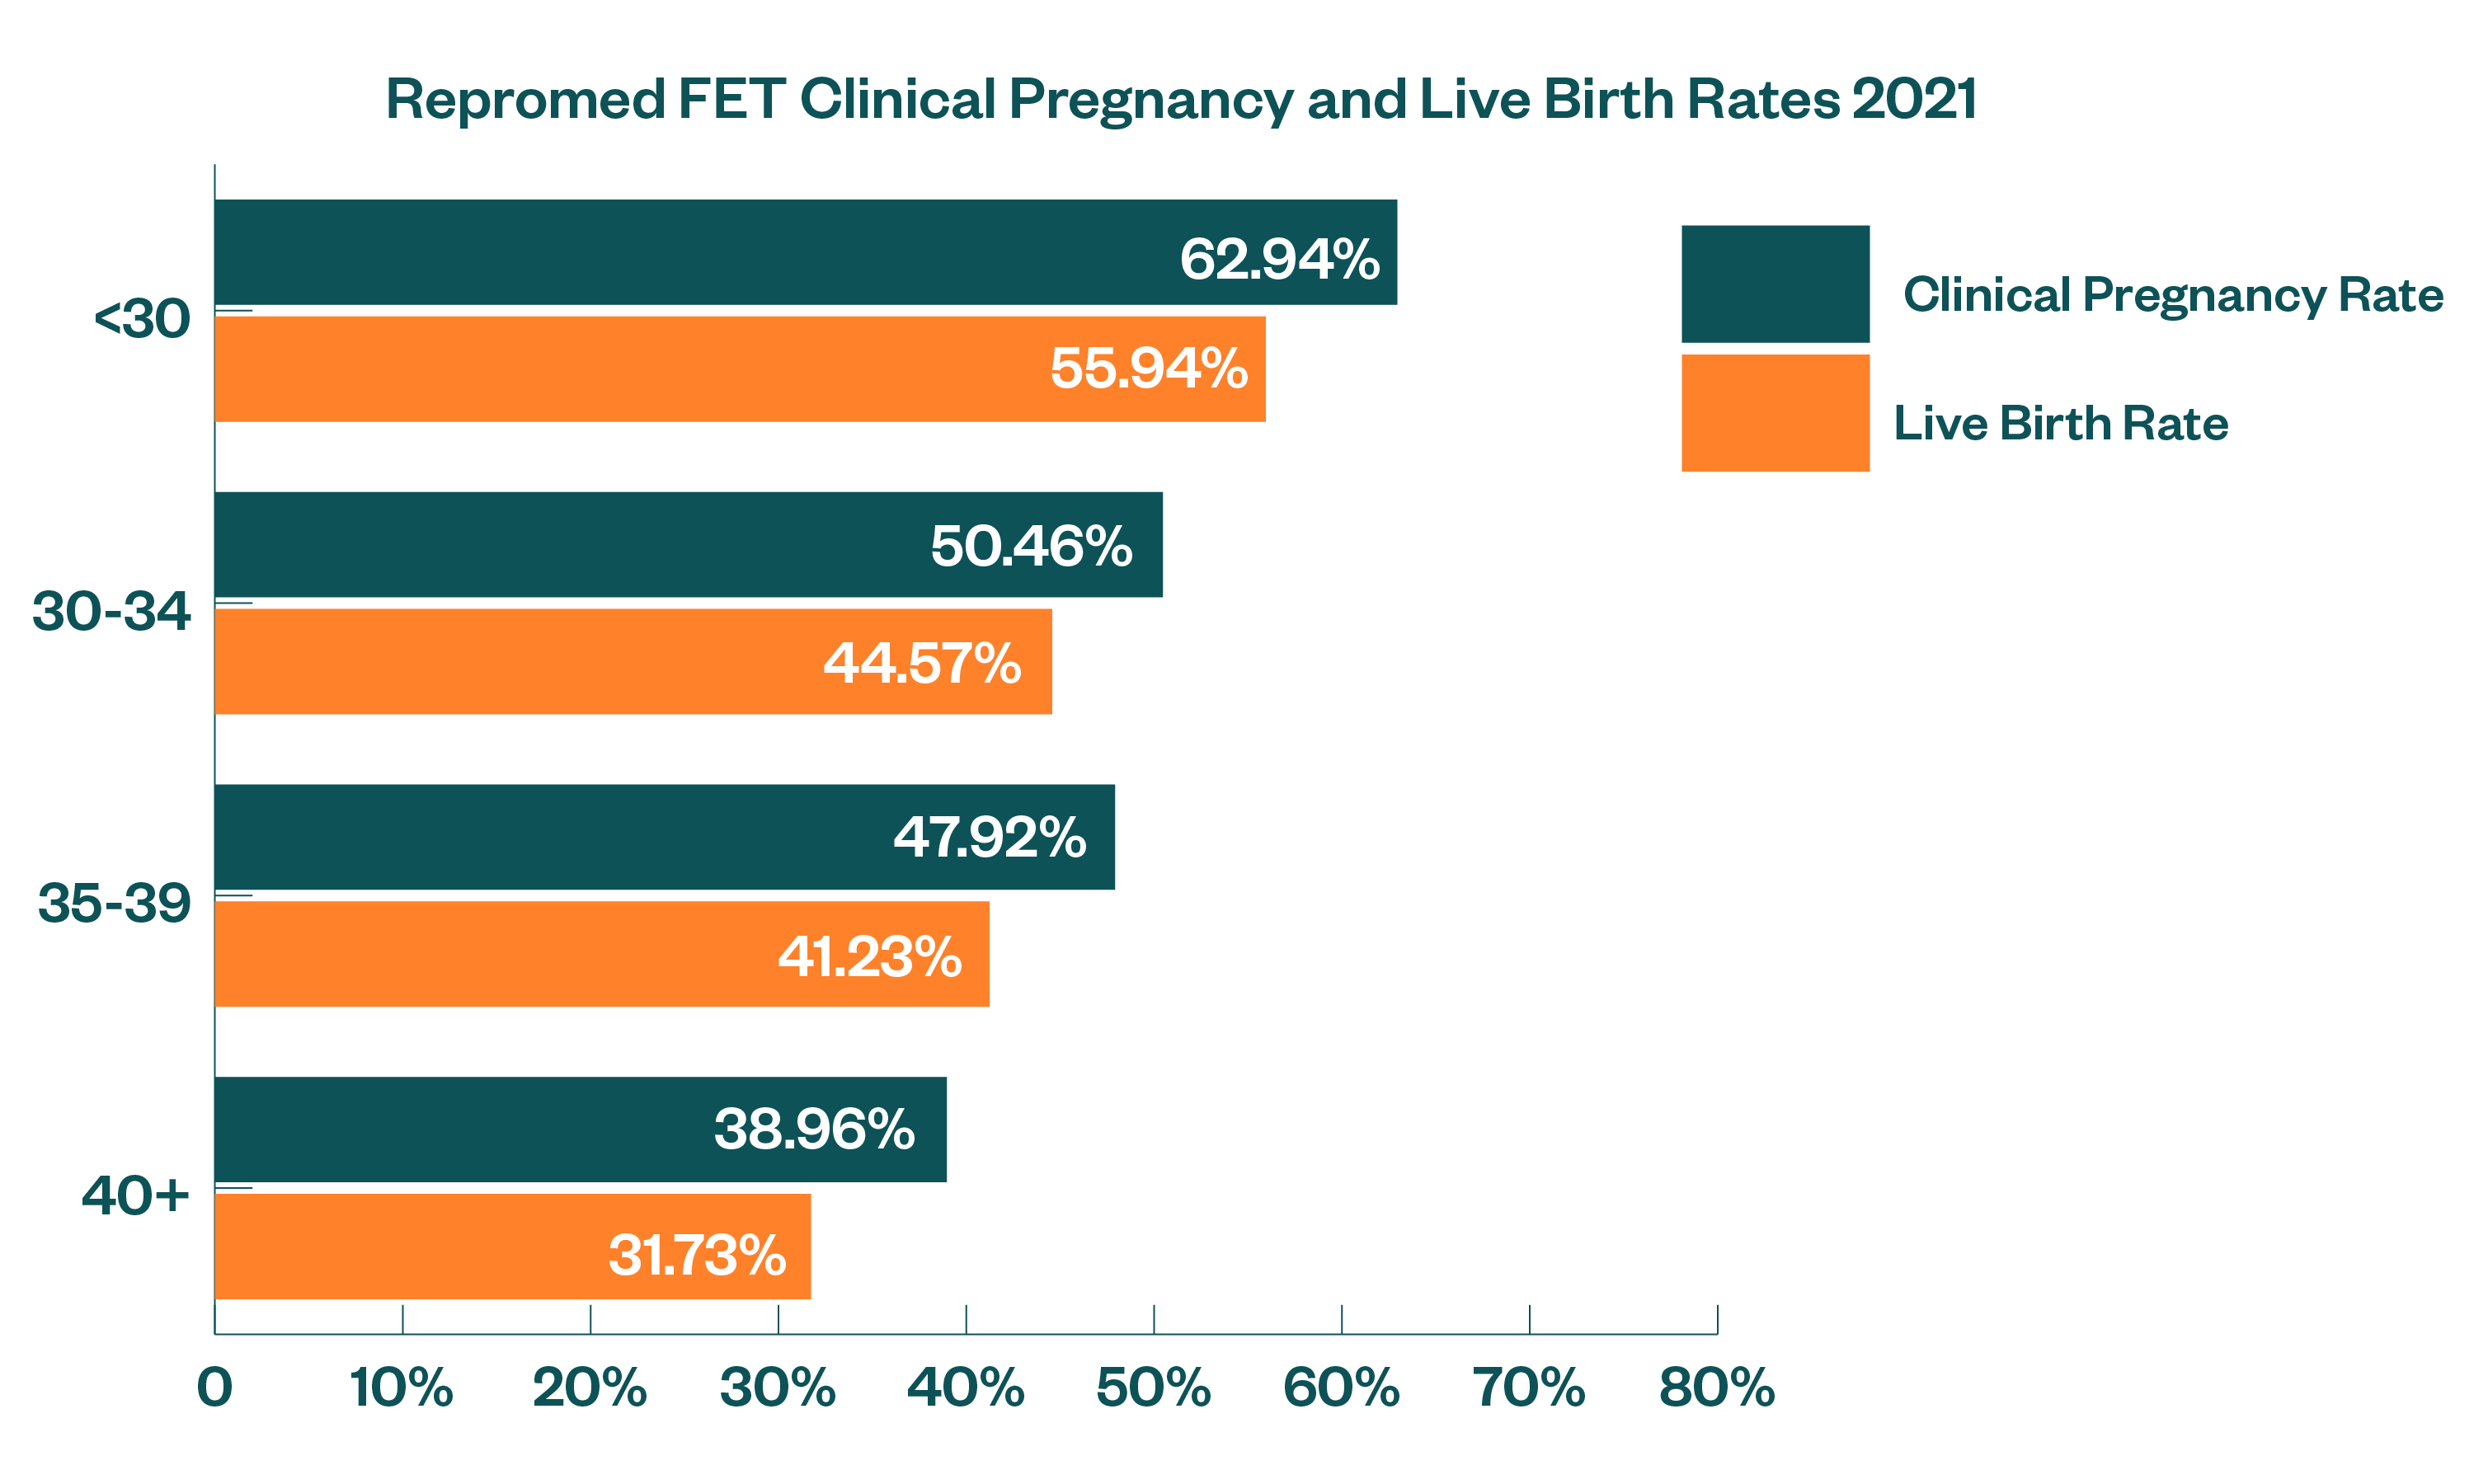 FET Clinical Pregnancy and Live Birth Rates 2021